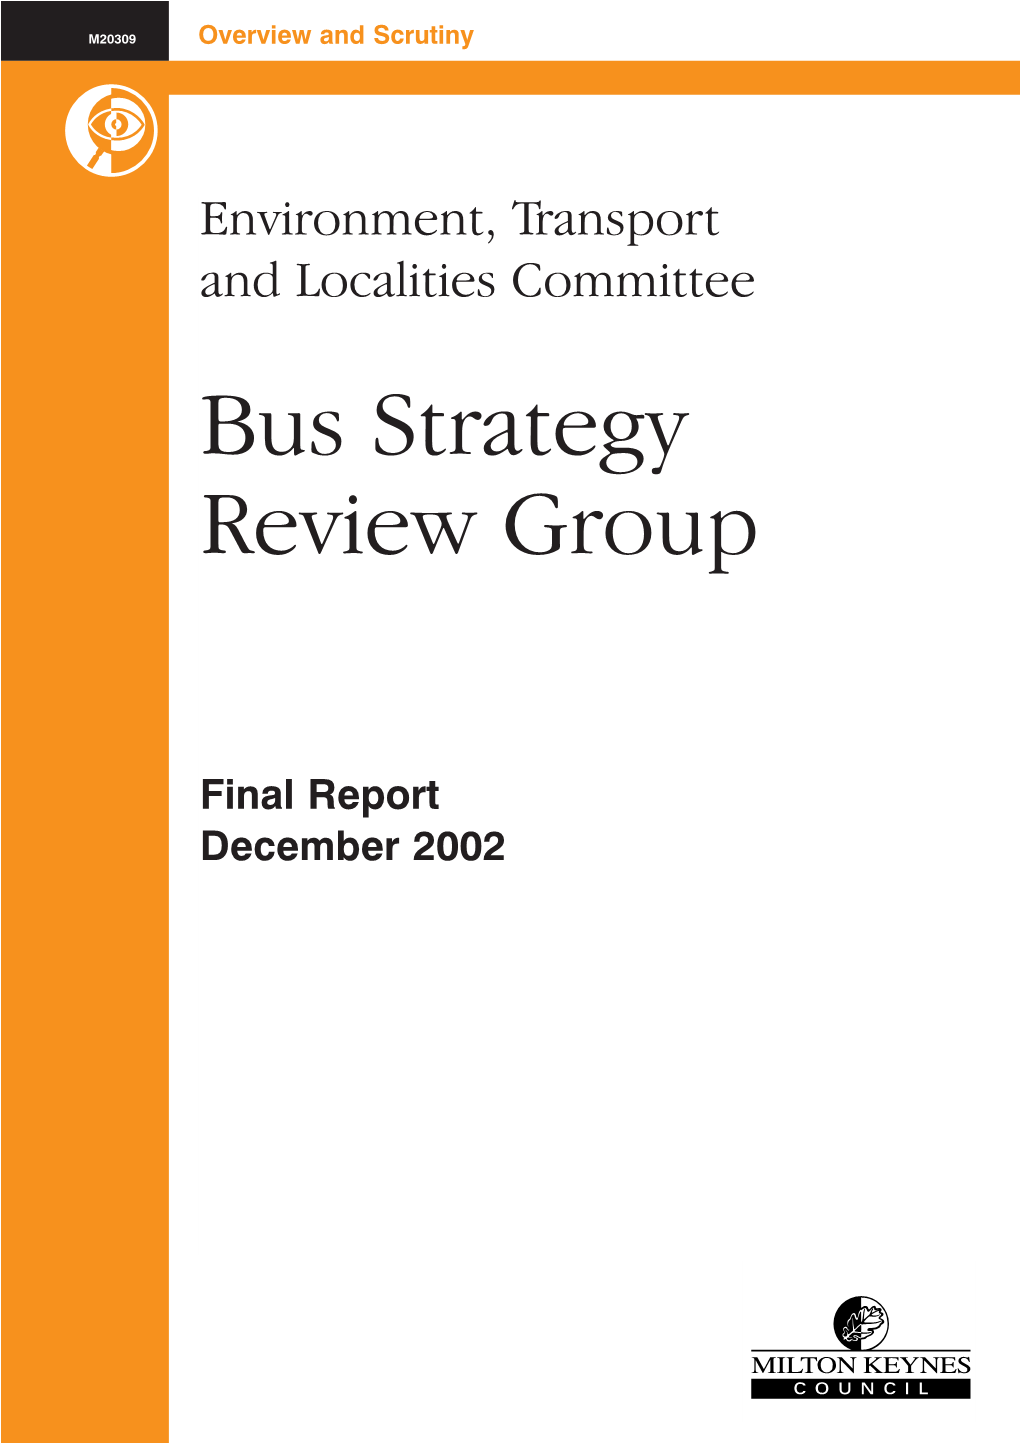 Bus Strategy Review Group